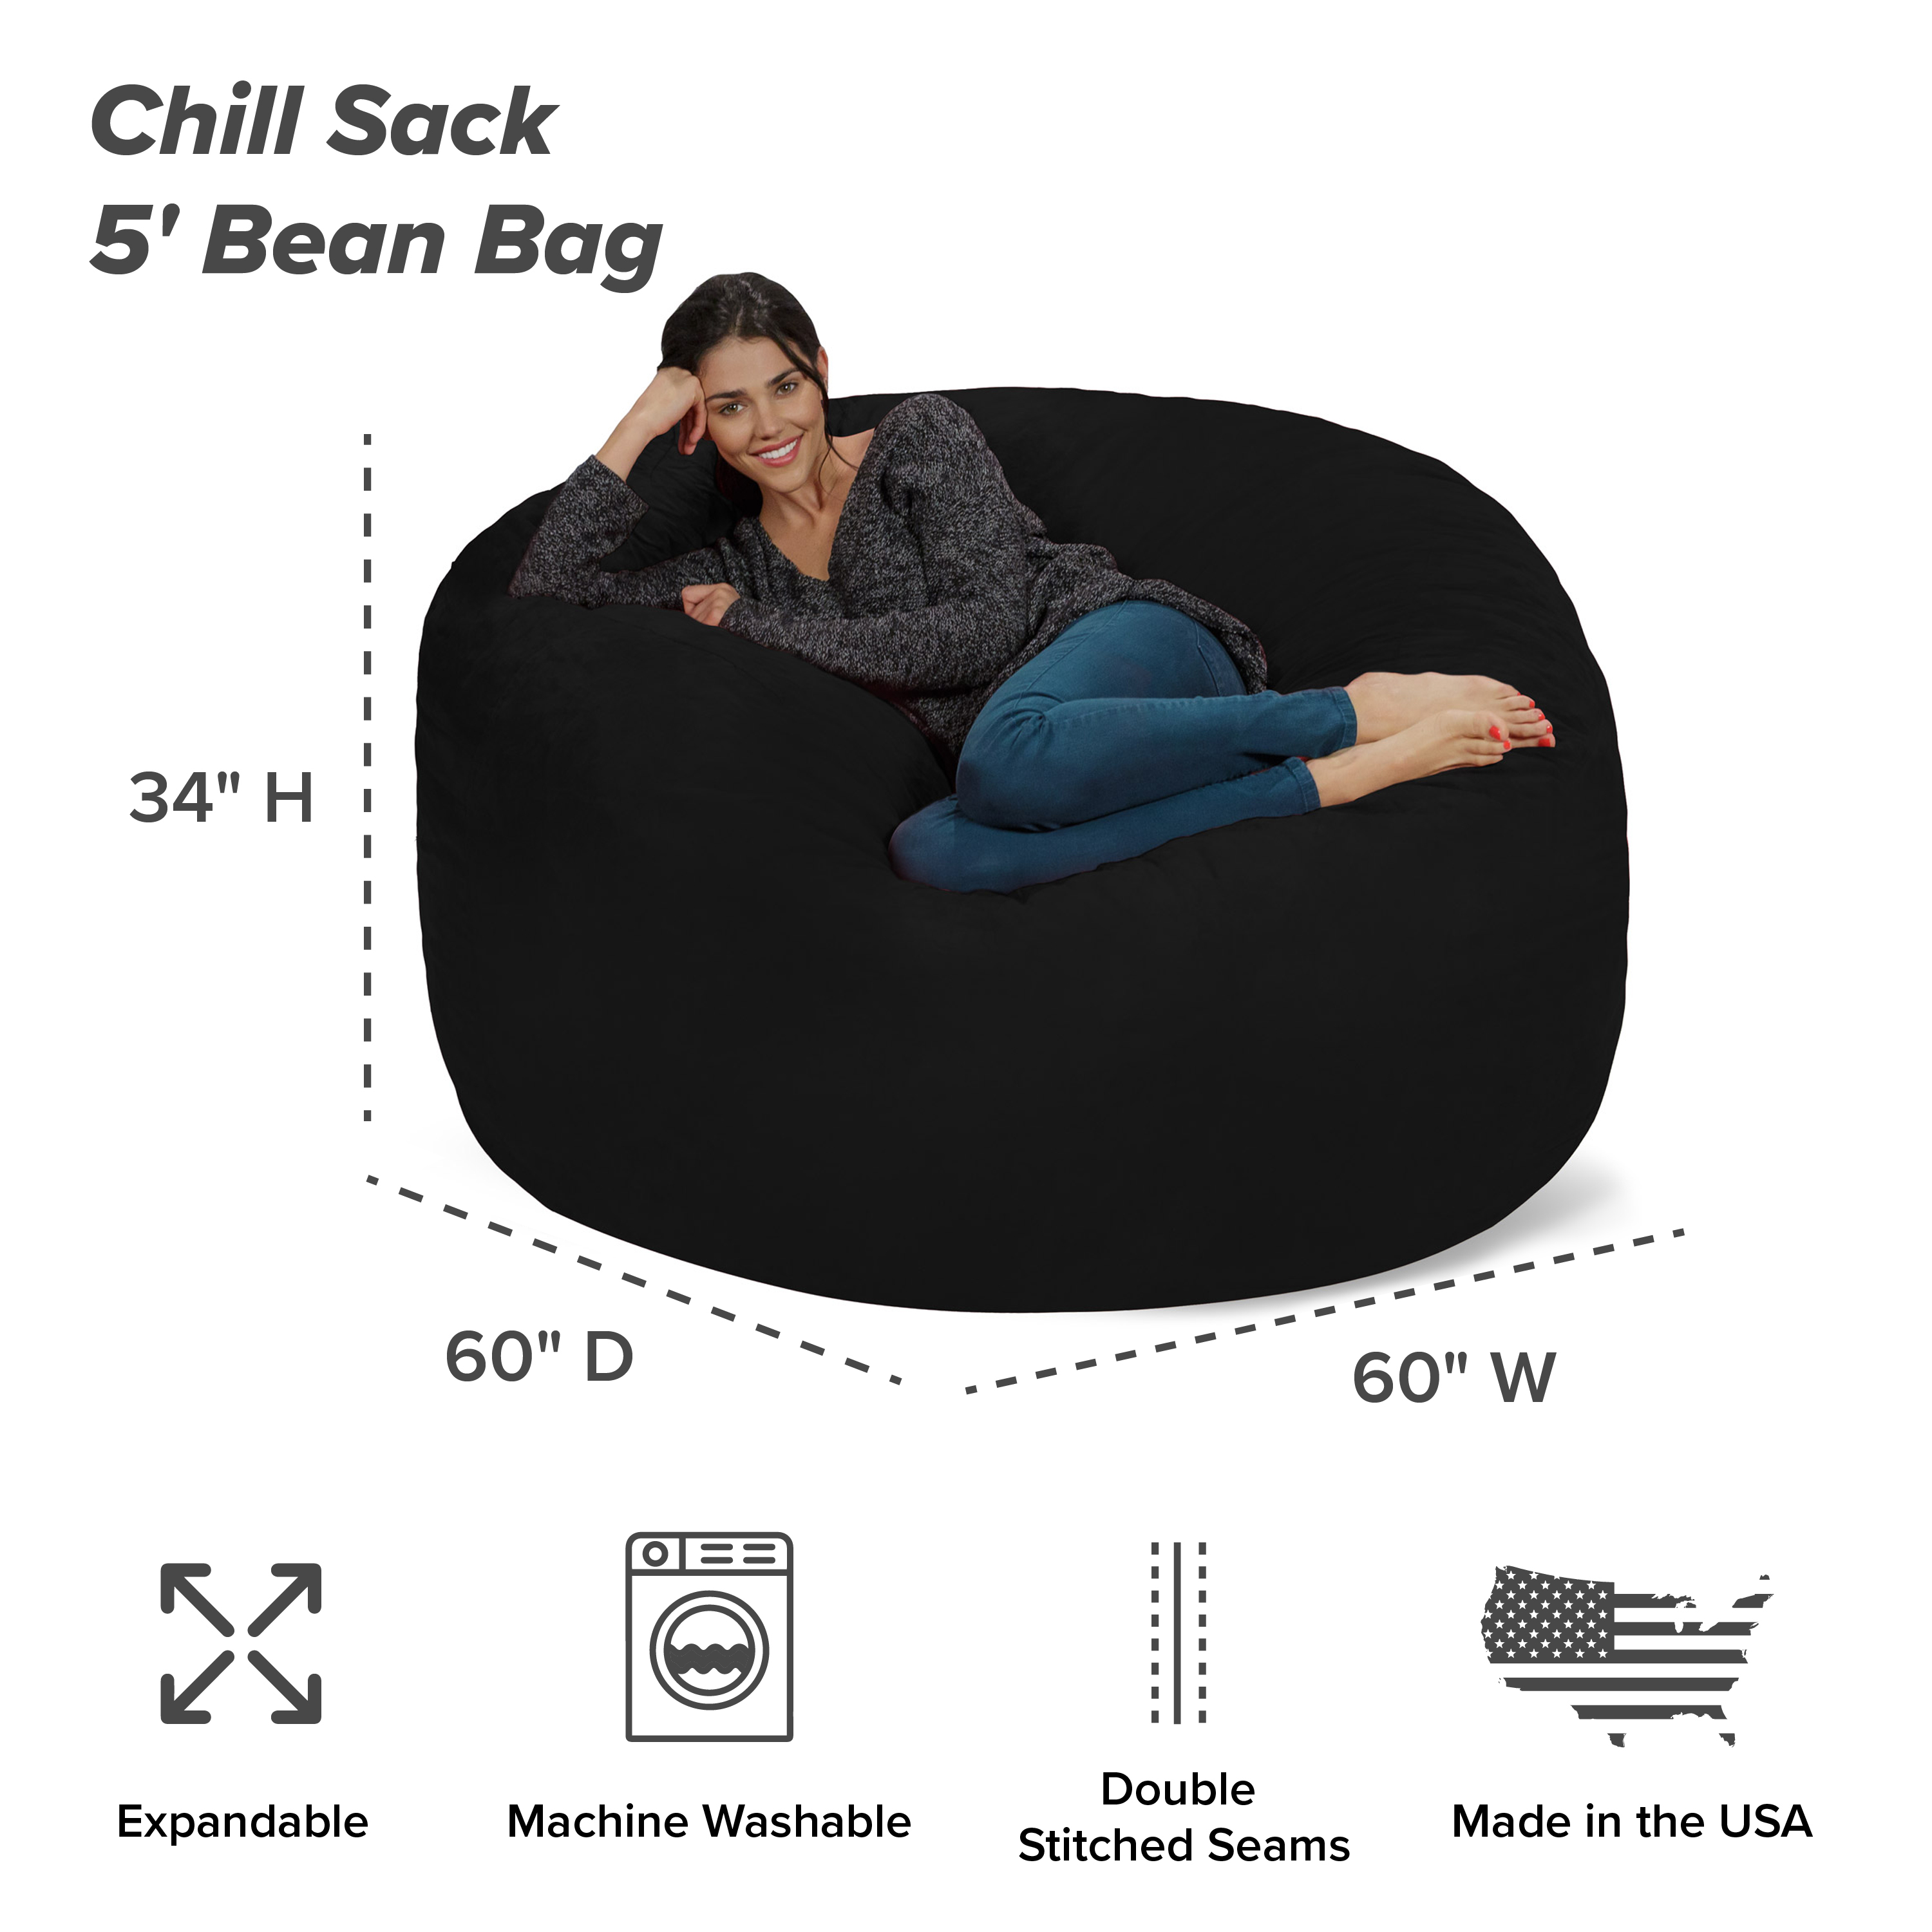 Chill Sack Bean Bag Chair, Memory Foam Lounger with Microsuede Cover, Kids, Adults, 5 ft, Black - image 2 of 5